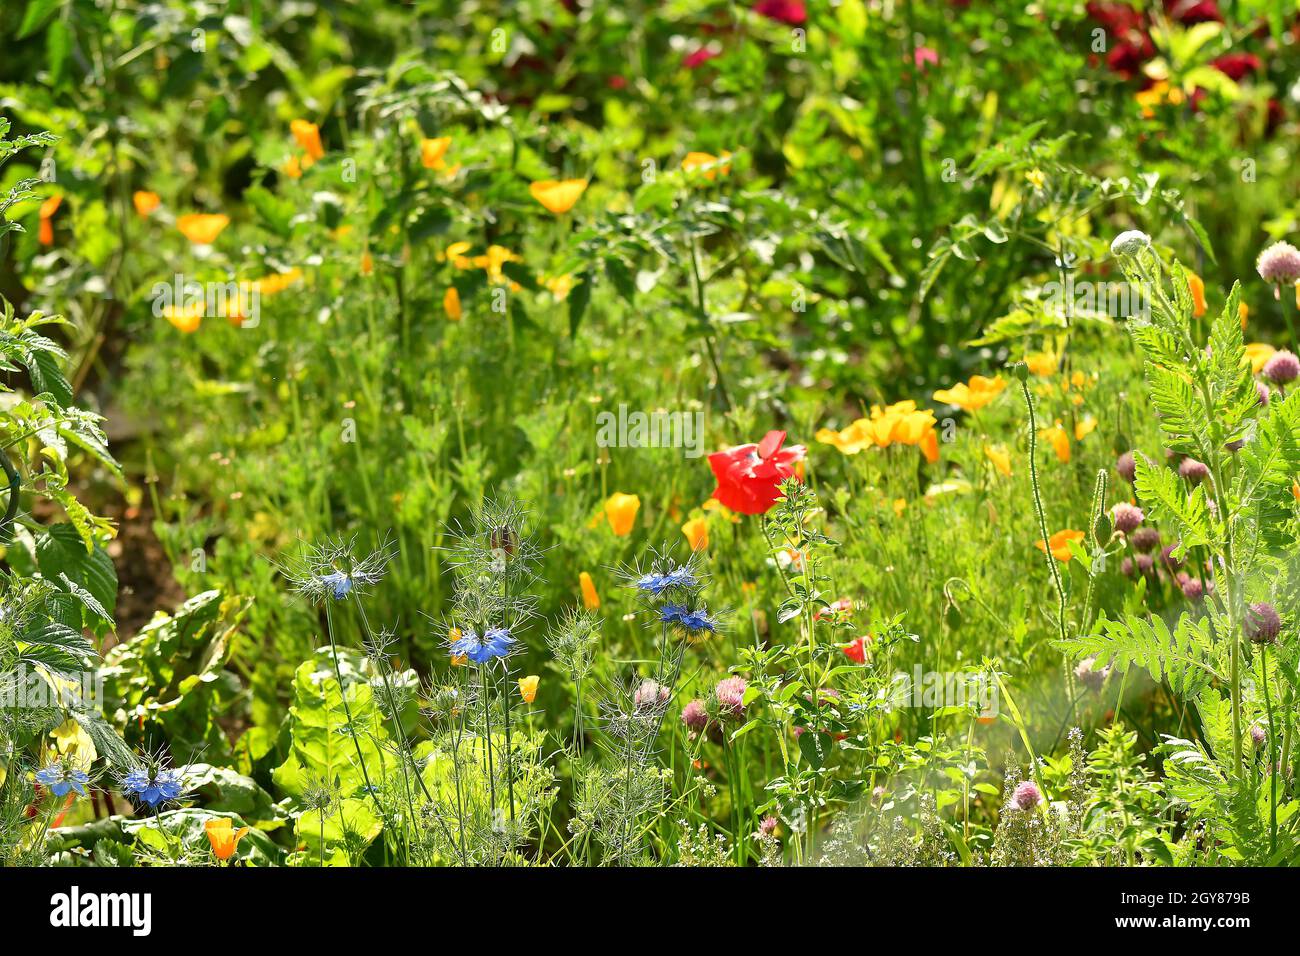 garden with many flowers and herbs in summertime Stock Photo